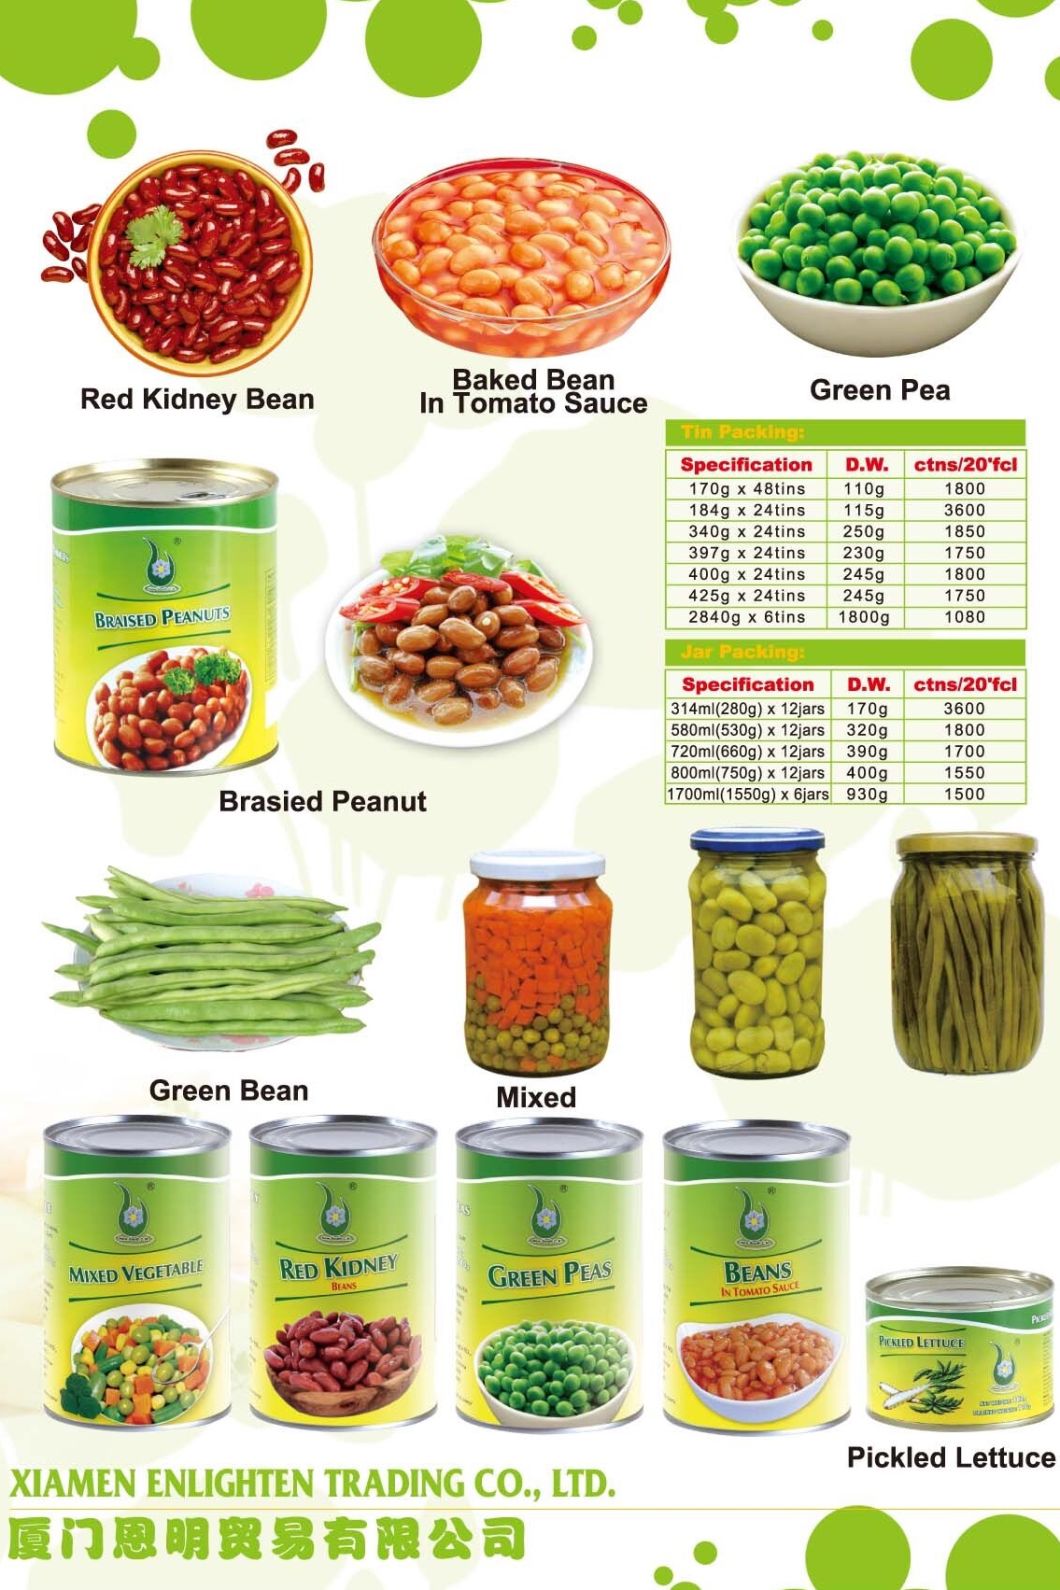 Canned Sweet Corn Wholesale Pantry Preserved Canned Vegetables Corn in Can Canned Sweet Kernel Corn 130g